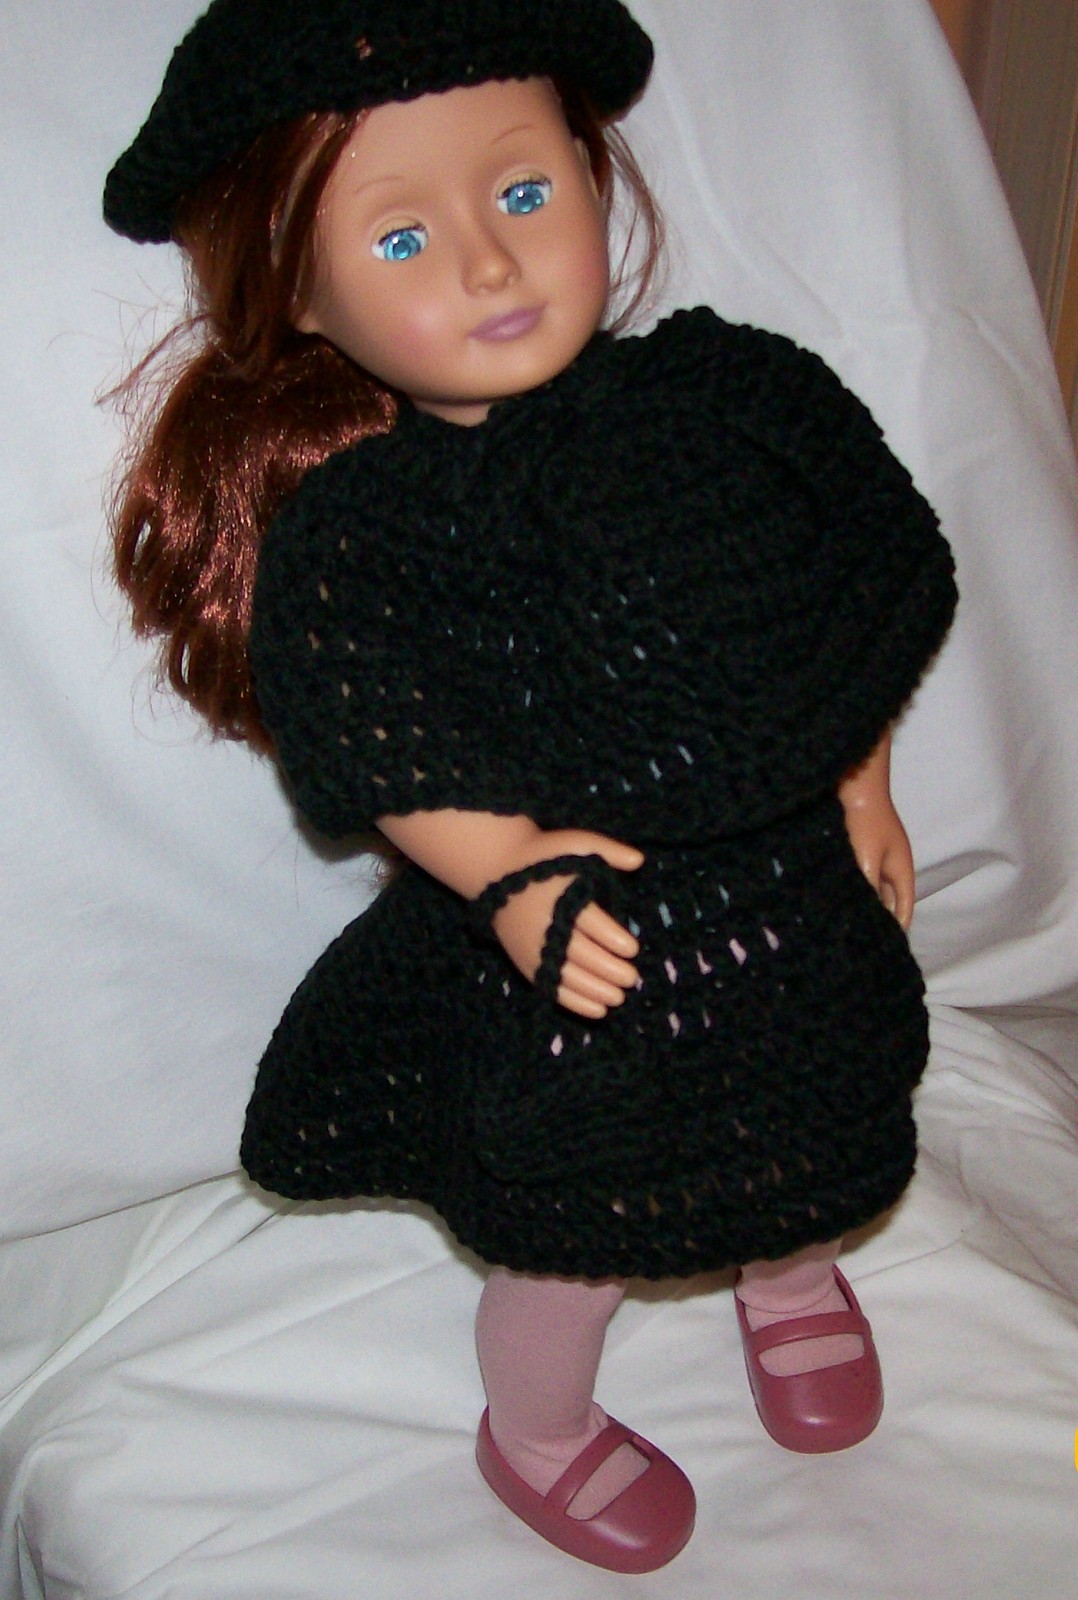 Primary image for American Girl 4 Piece Outfit, Handmade, Crochet, Poncho, Skirt, Hat, Purse